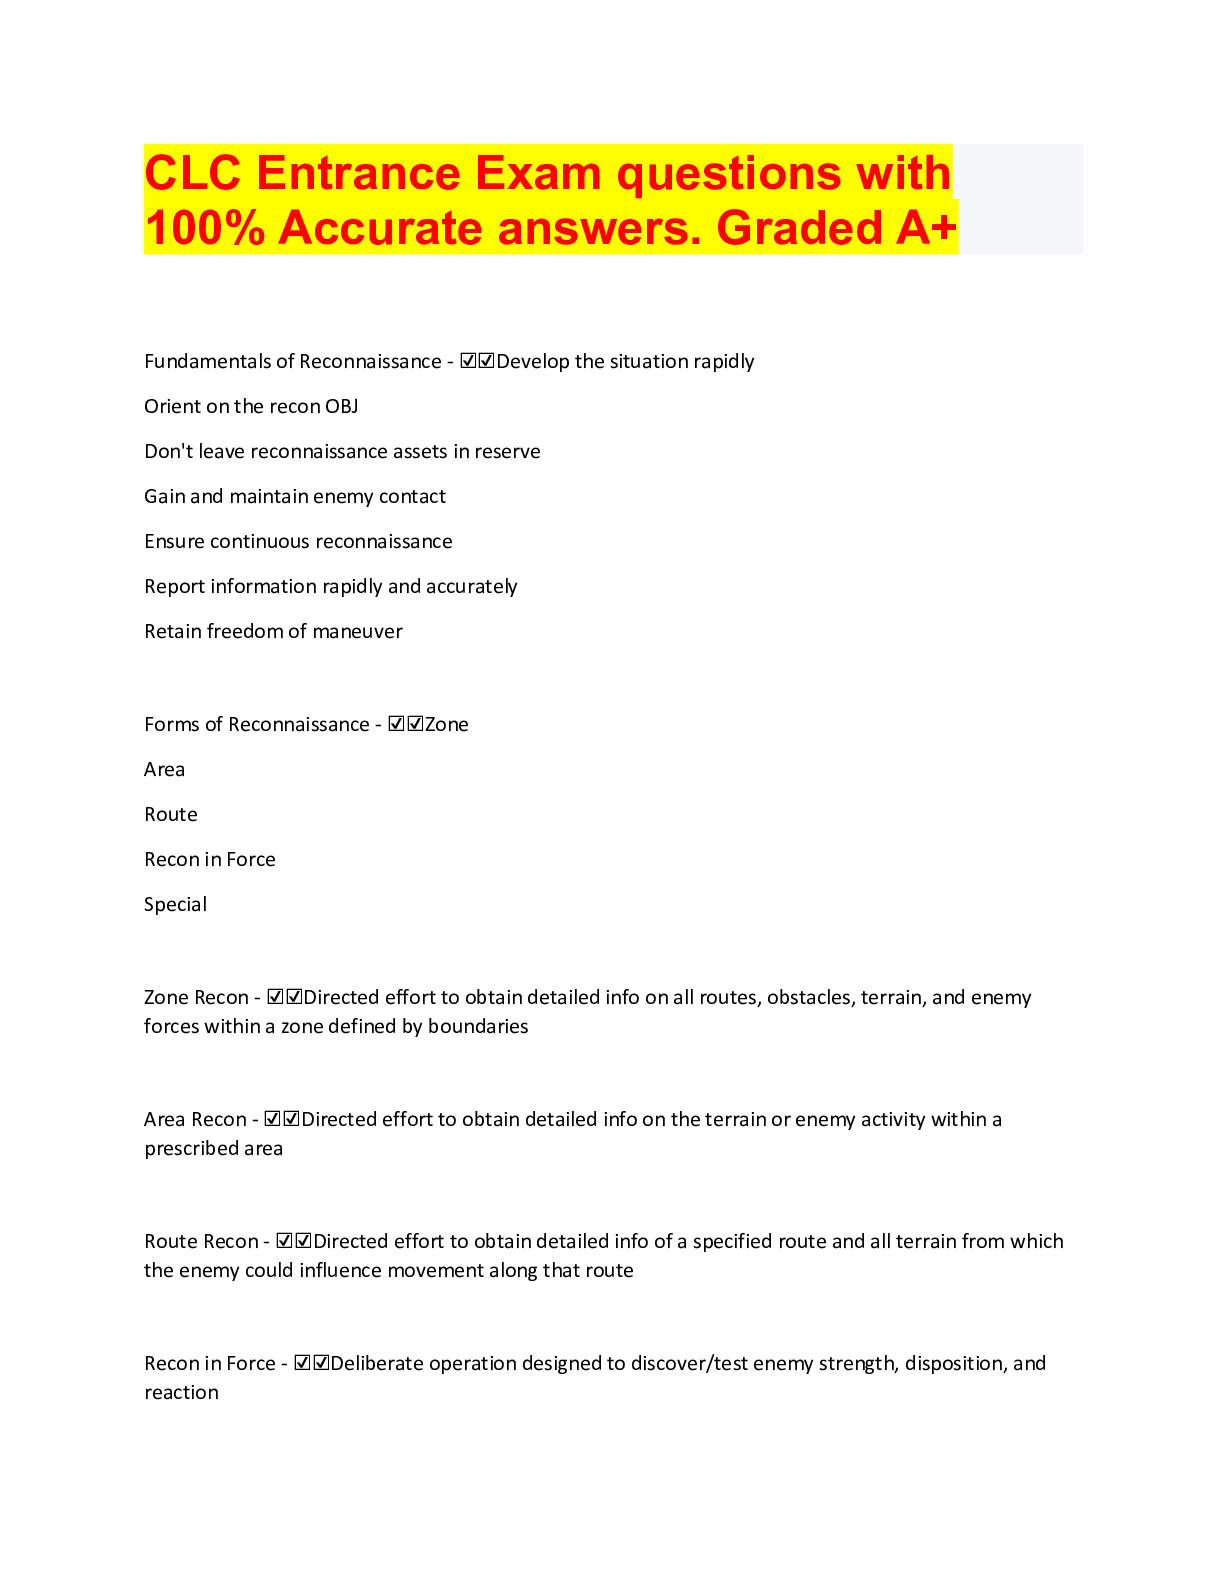 CLC Exam Questions with 100 Accurate Answers. Graded A+ Browsegrades